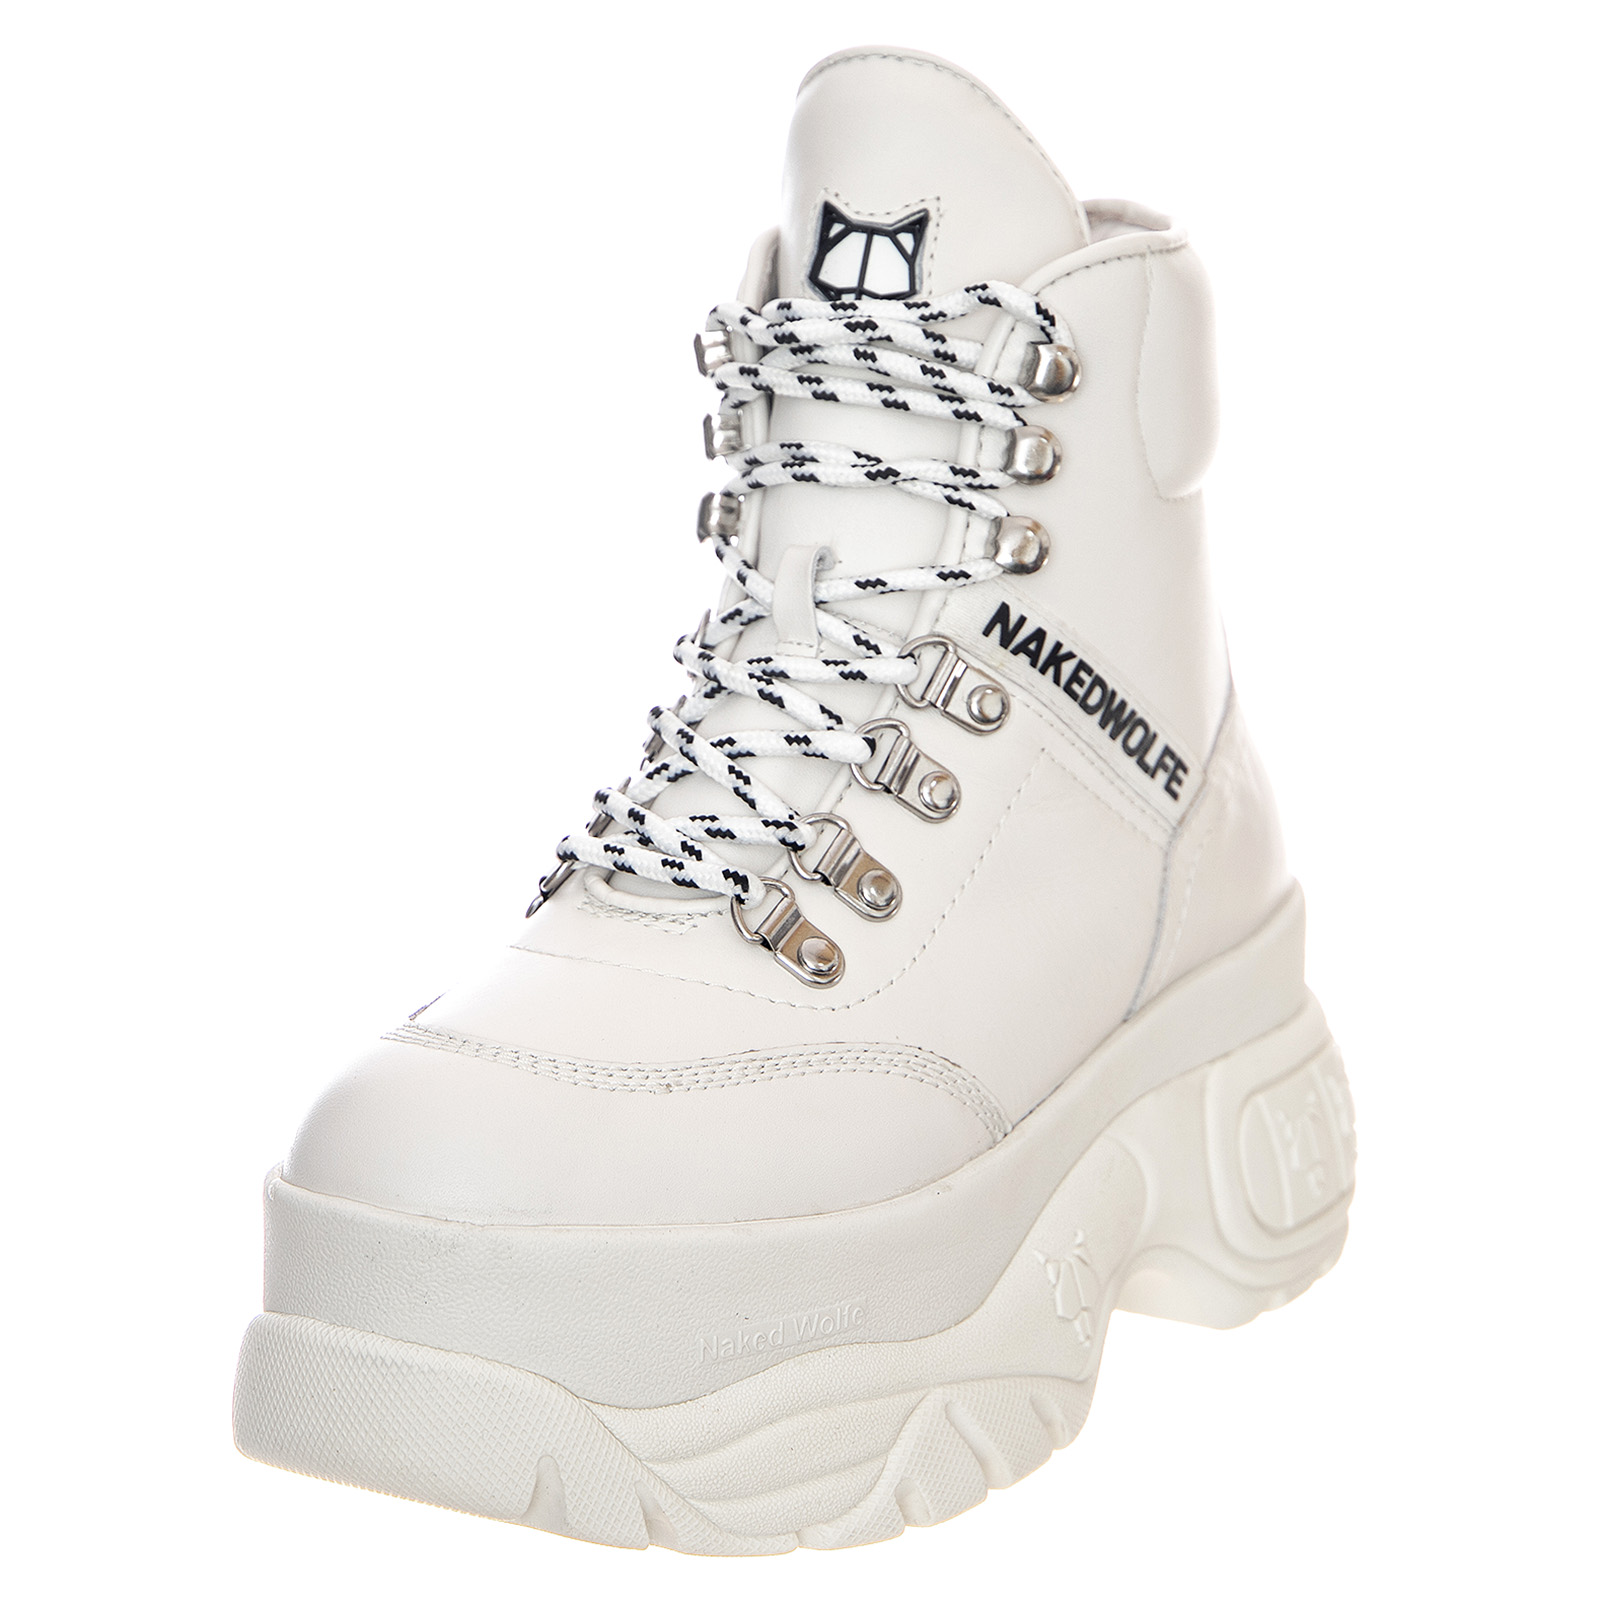 Naked wolfe wicked boots - white - stivali donna bianchi 